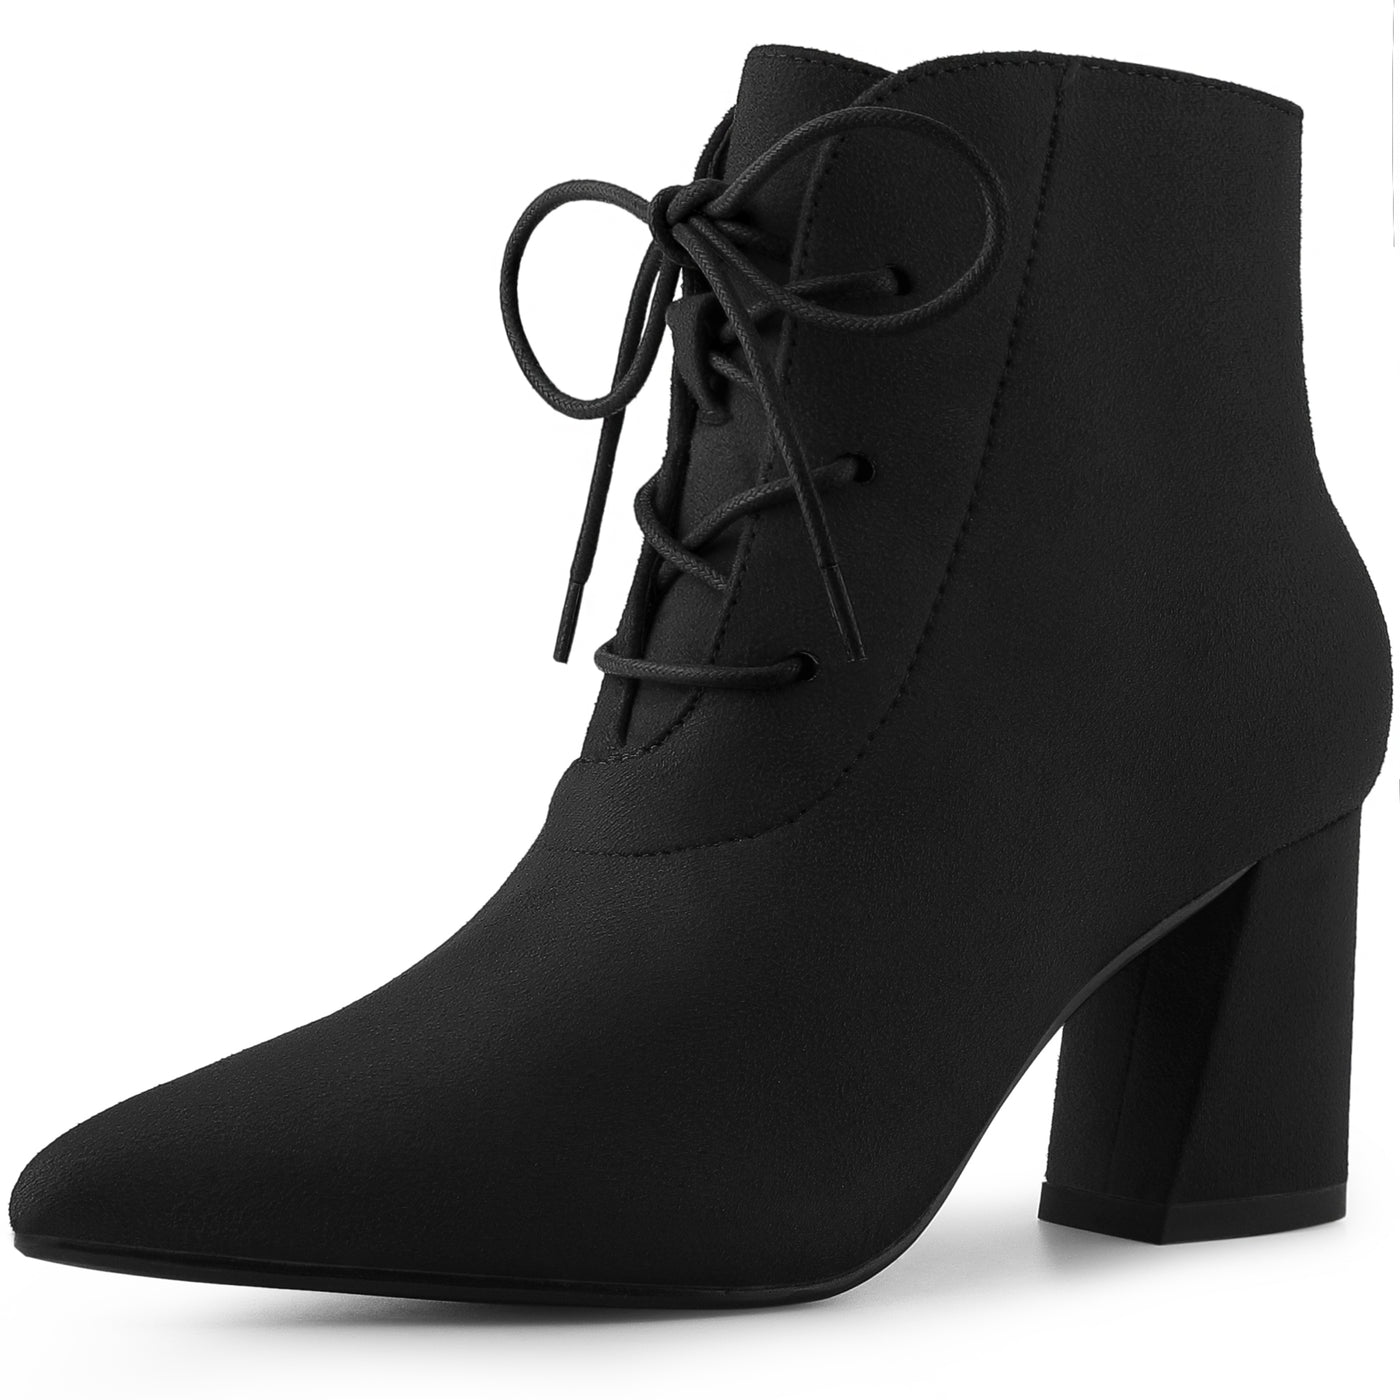 Bublédon Perphy Pointed Toe Lace Up Block Heel Ankle Boots for Women